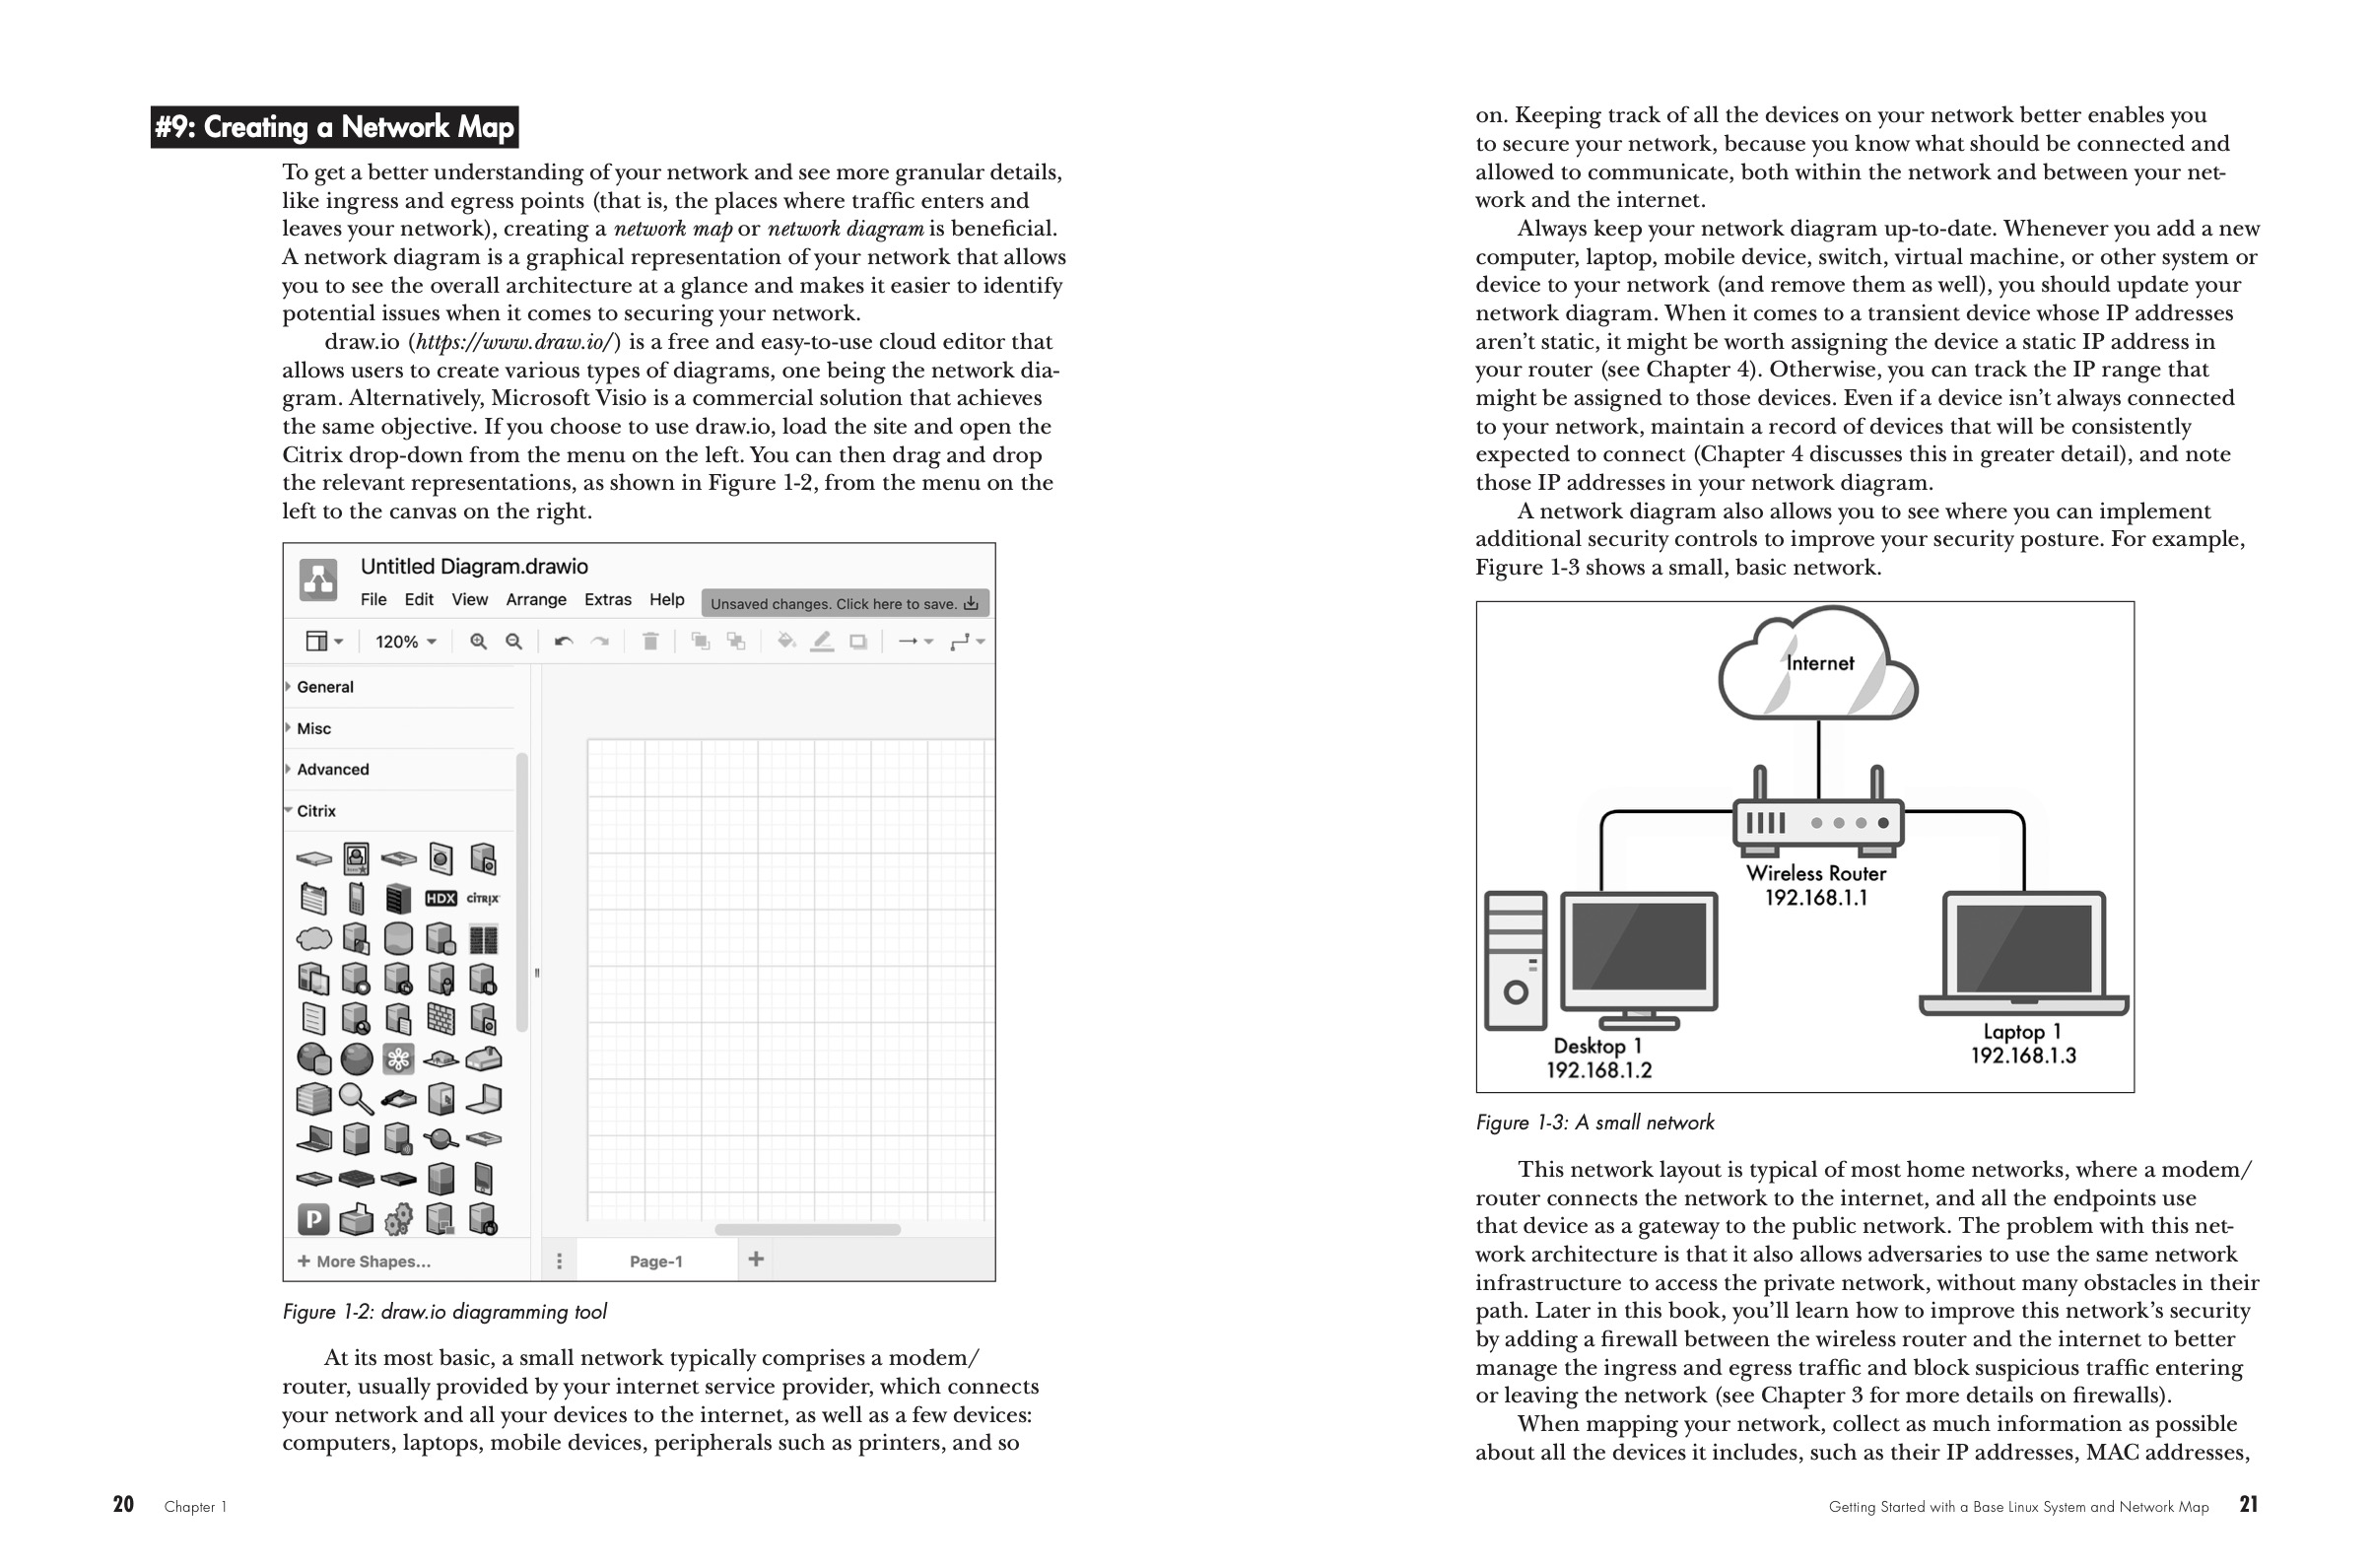 Cybersecurity for Small Networks pages 20-21